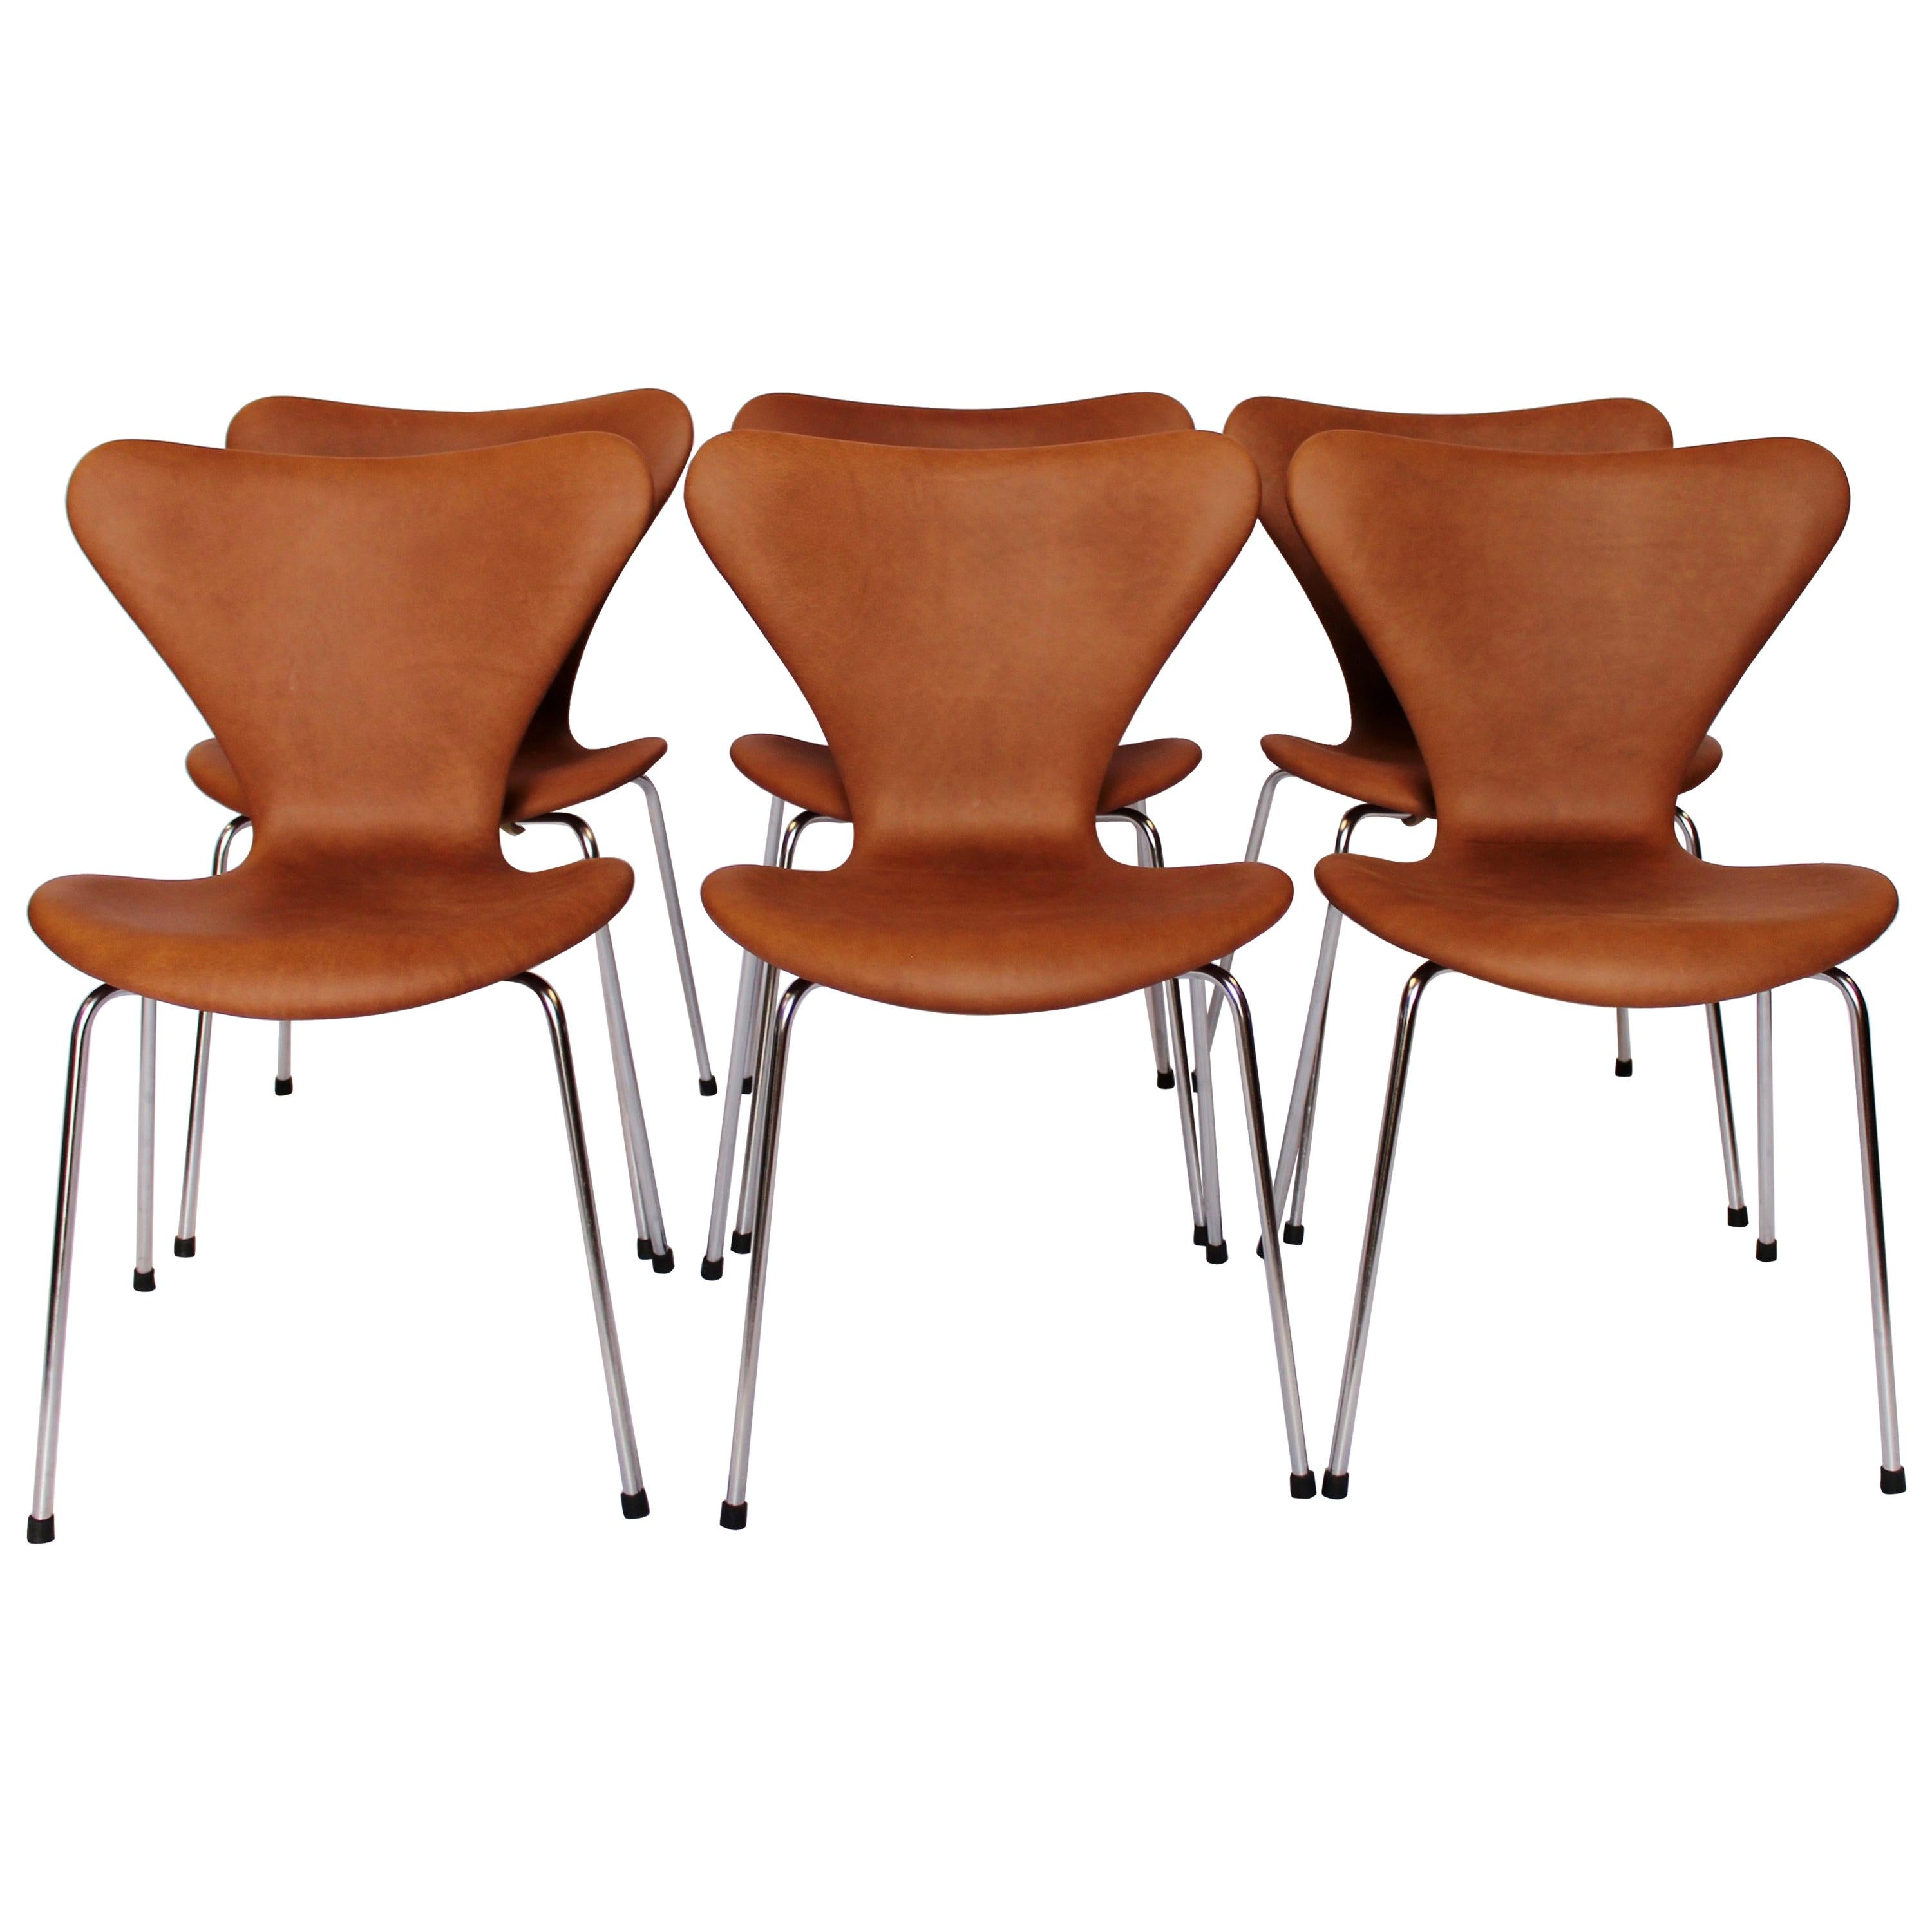 Set of 8 Series 7 Chairs, Model 3107, by Arne Jacobsen and Fritz Hansen, 1967